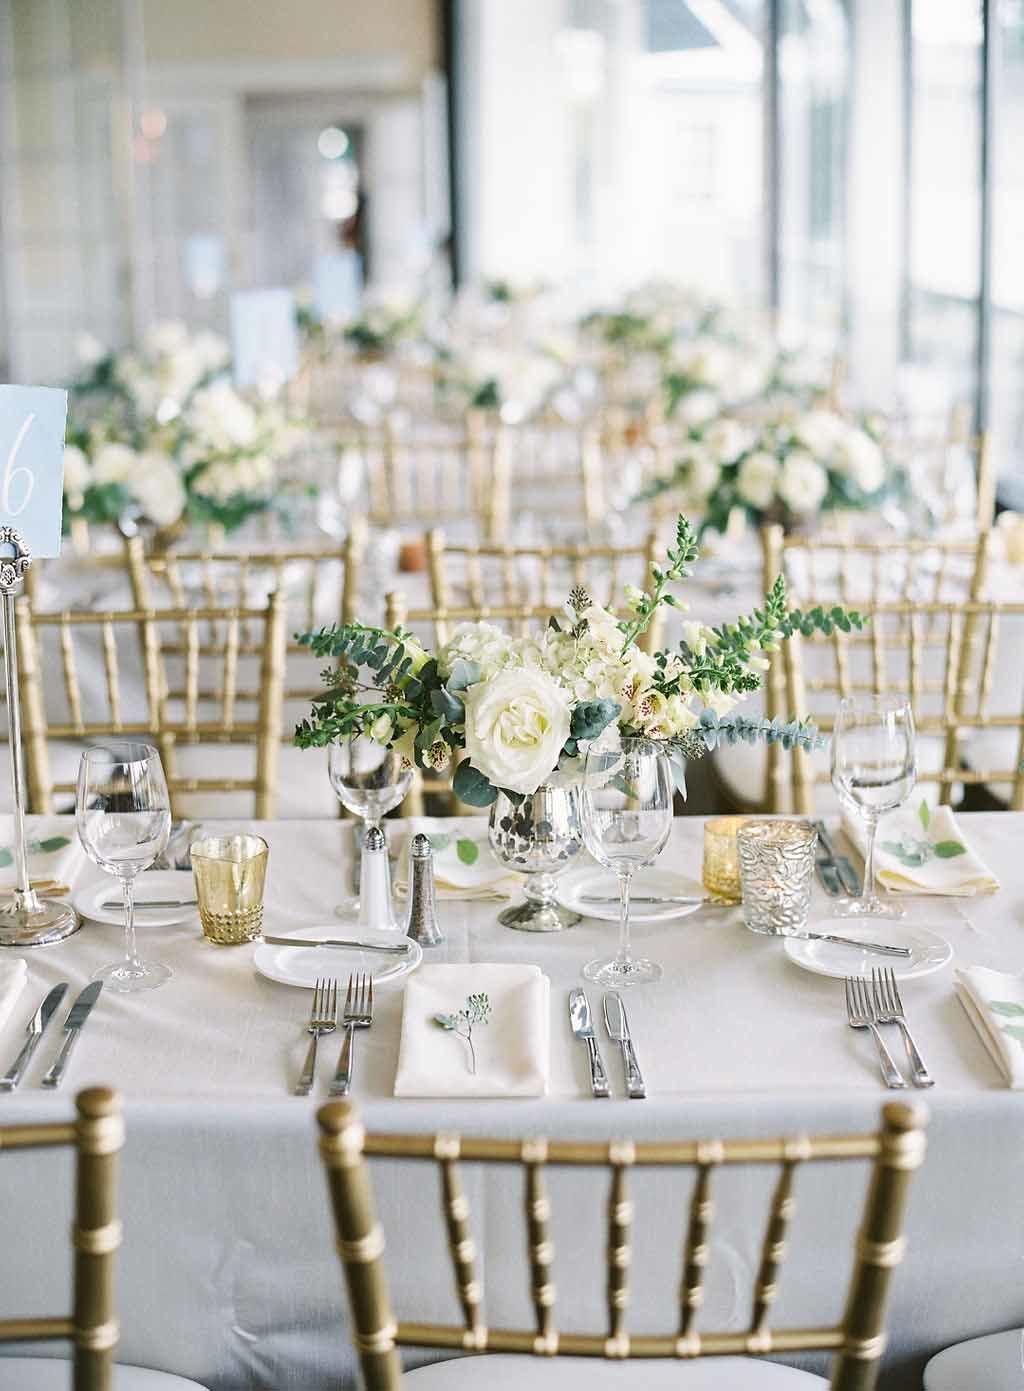 wedding reception tabes with white linens, gold chivari chairs, and white floral centerpieces